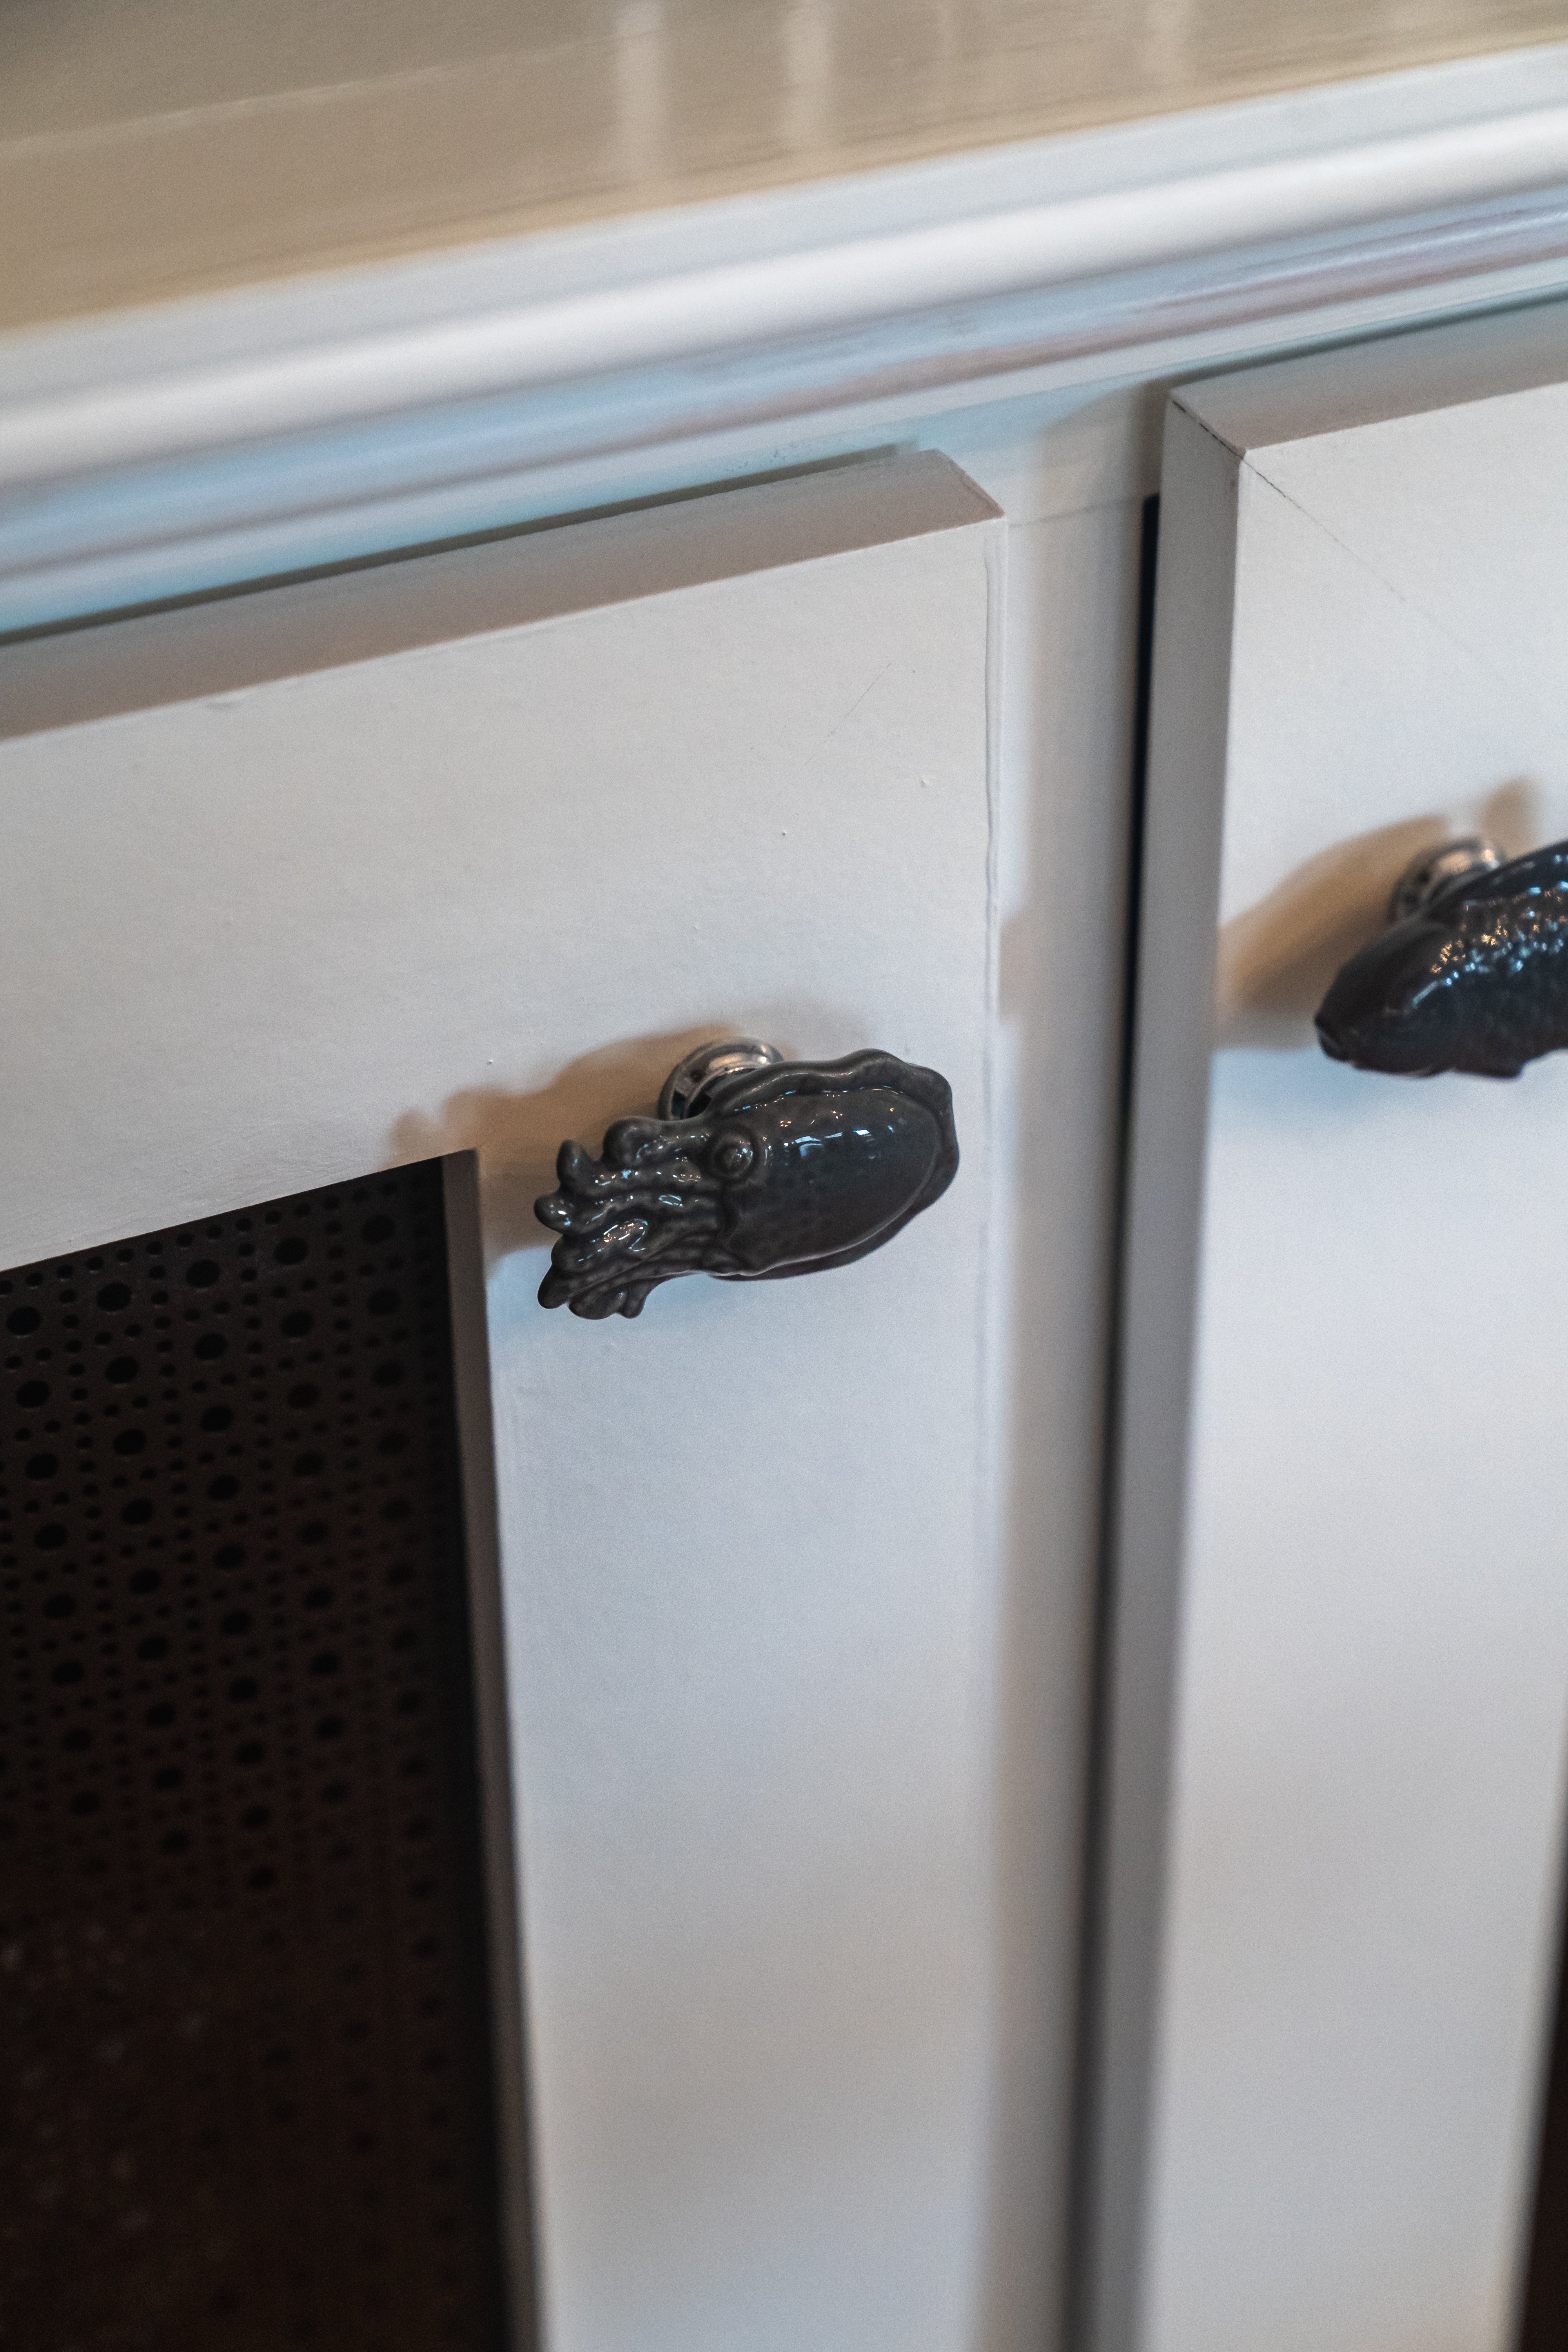 Black fish handle fixtures on cabinets